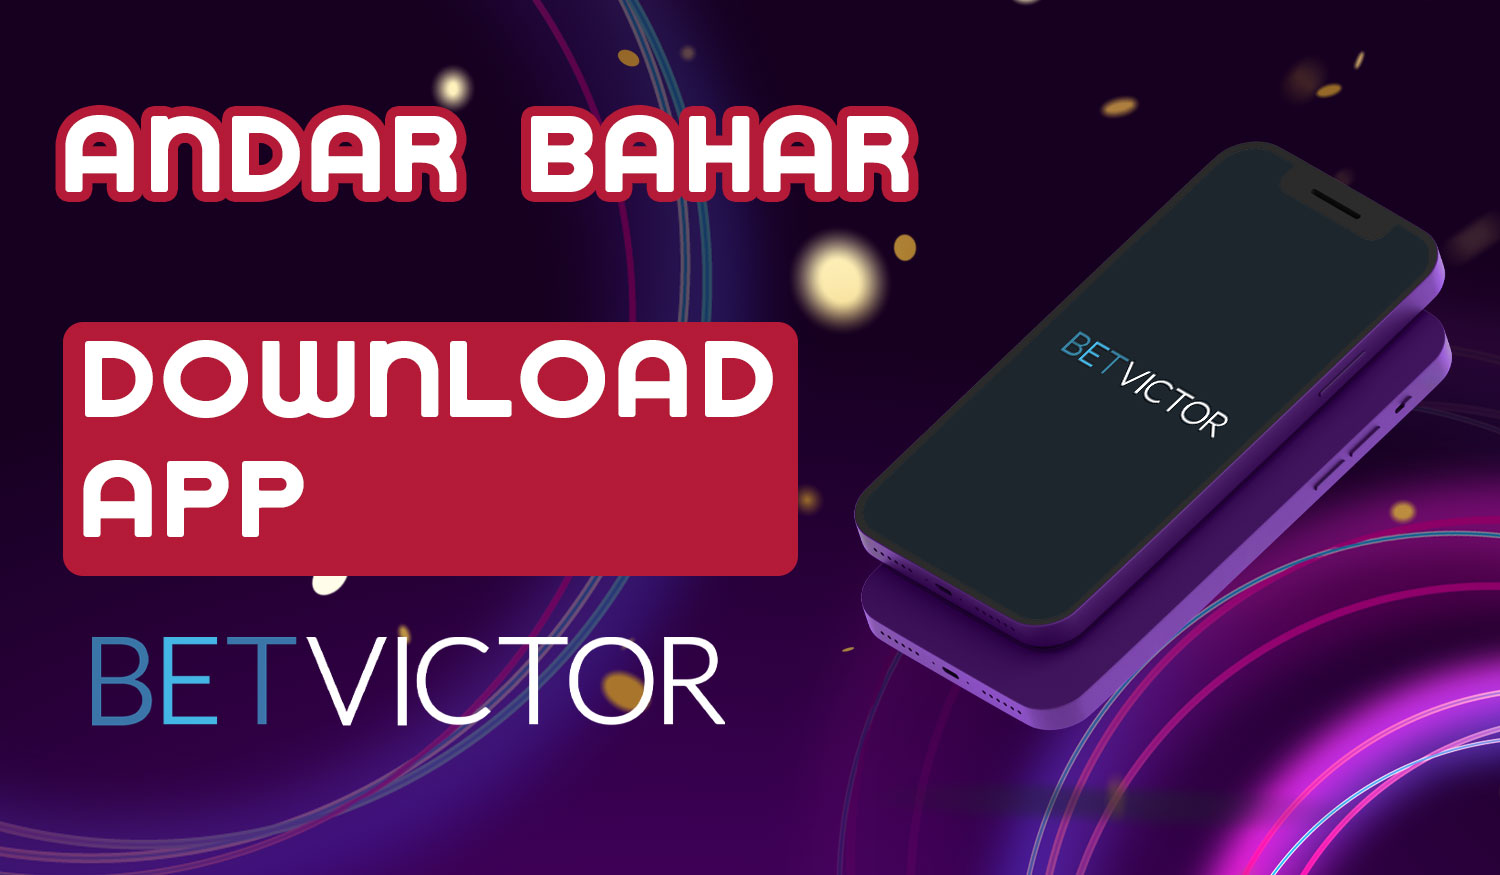 A detailed guide on how to download and install the BetVictor India mobile application for Android and iOS